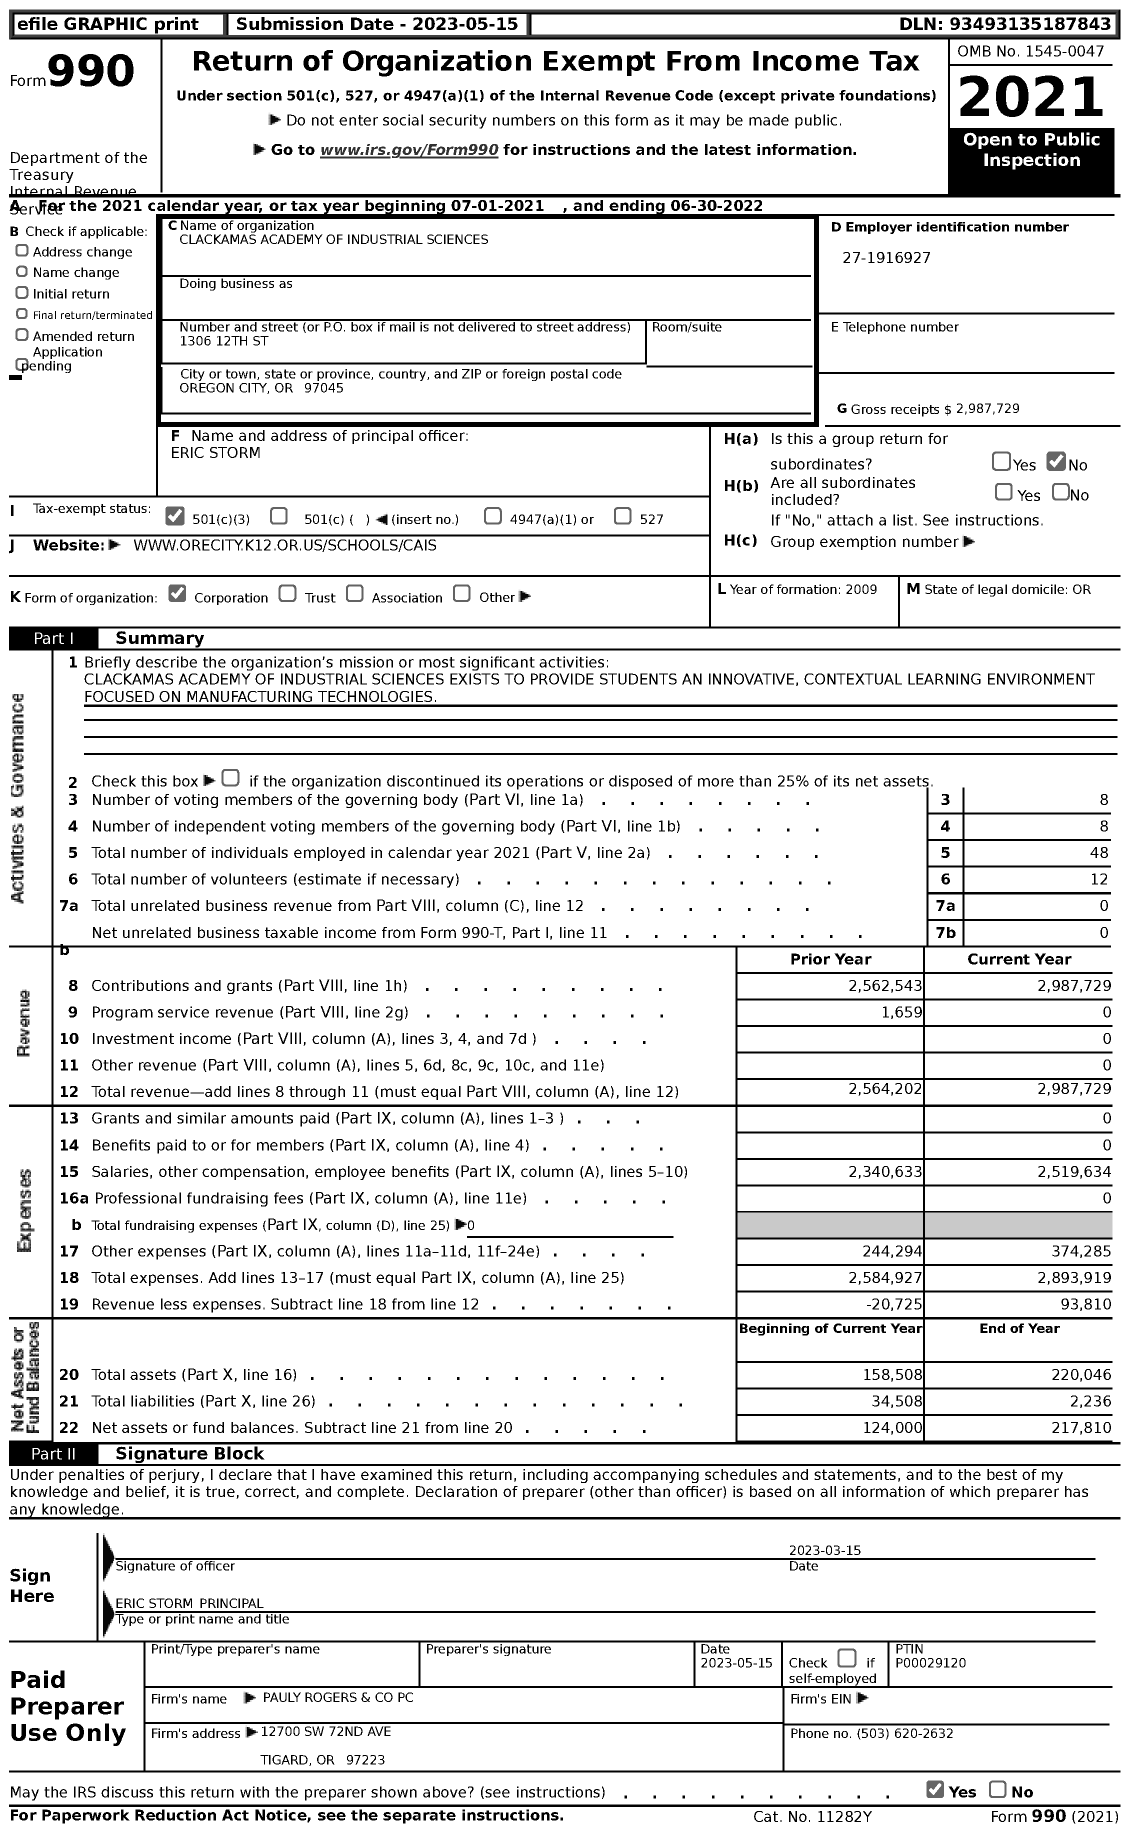 Image of first page of 2021 Form 990 for Clackamas Academy of Industrial Sciences